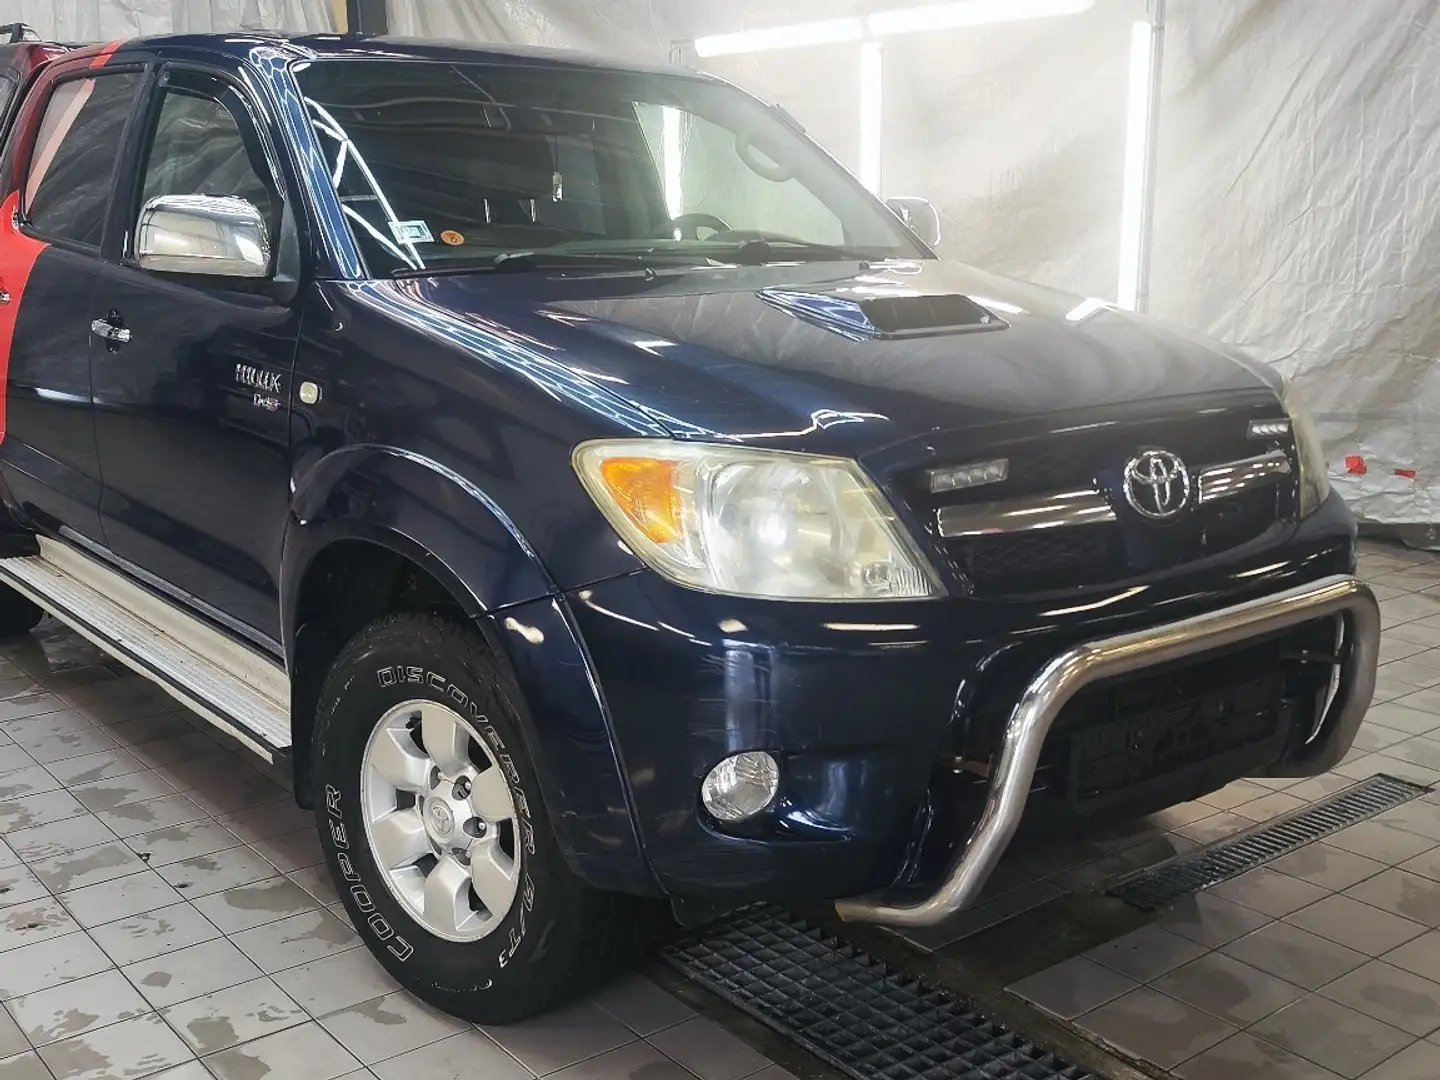 Toyota Hilux 4x4 Double Cab.to sell only Africa Black - 1